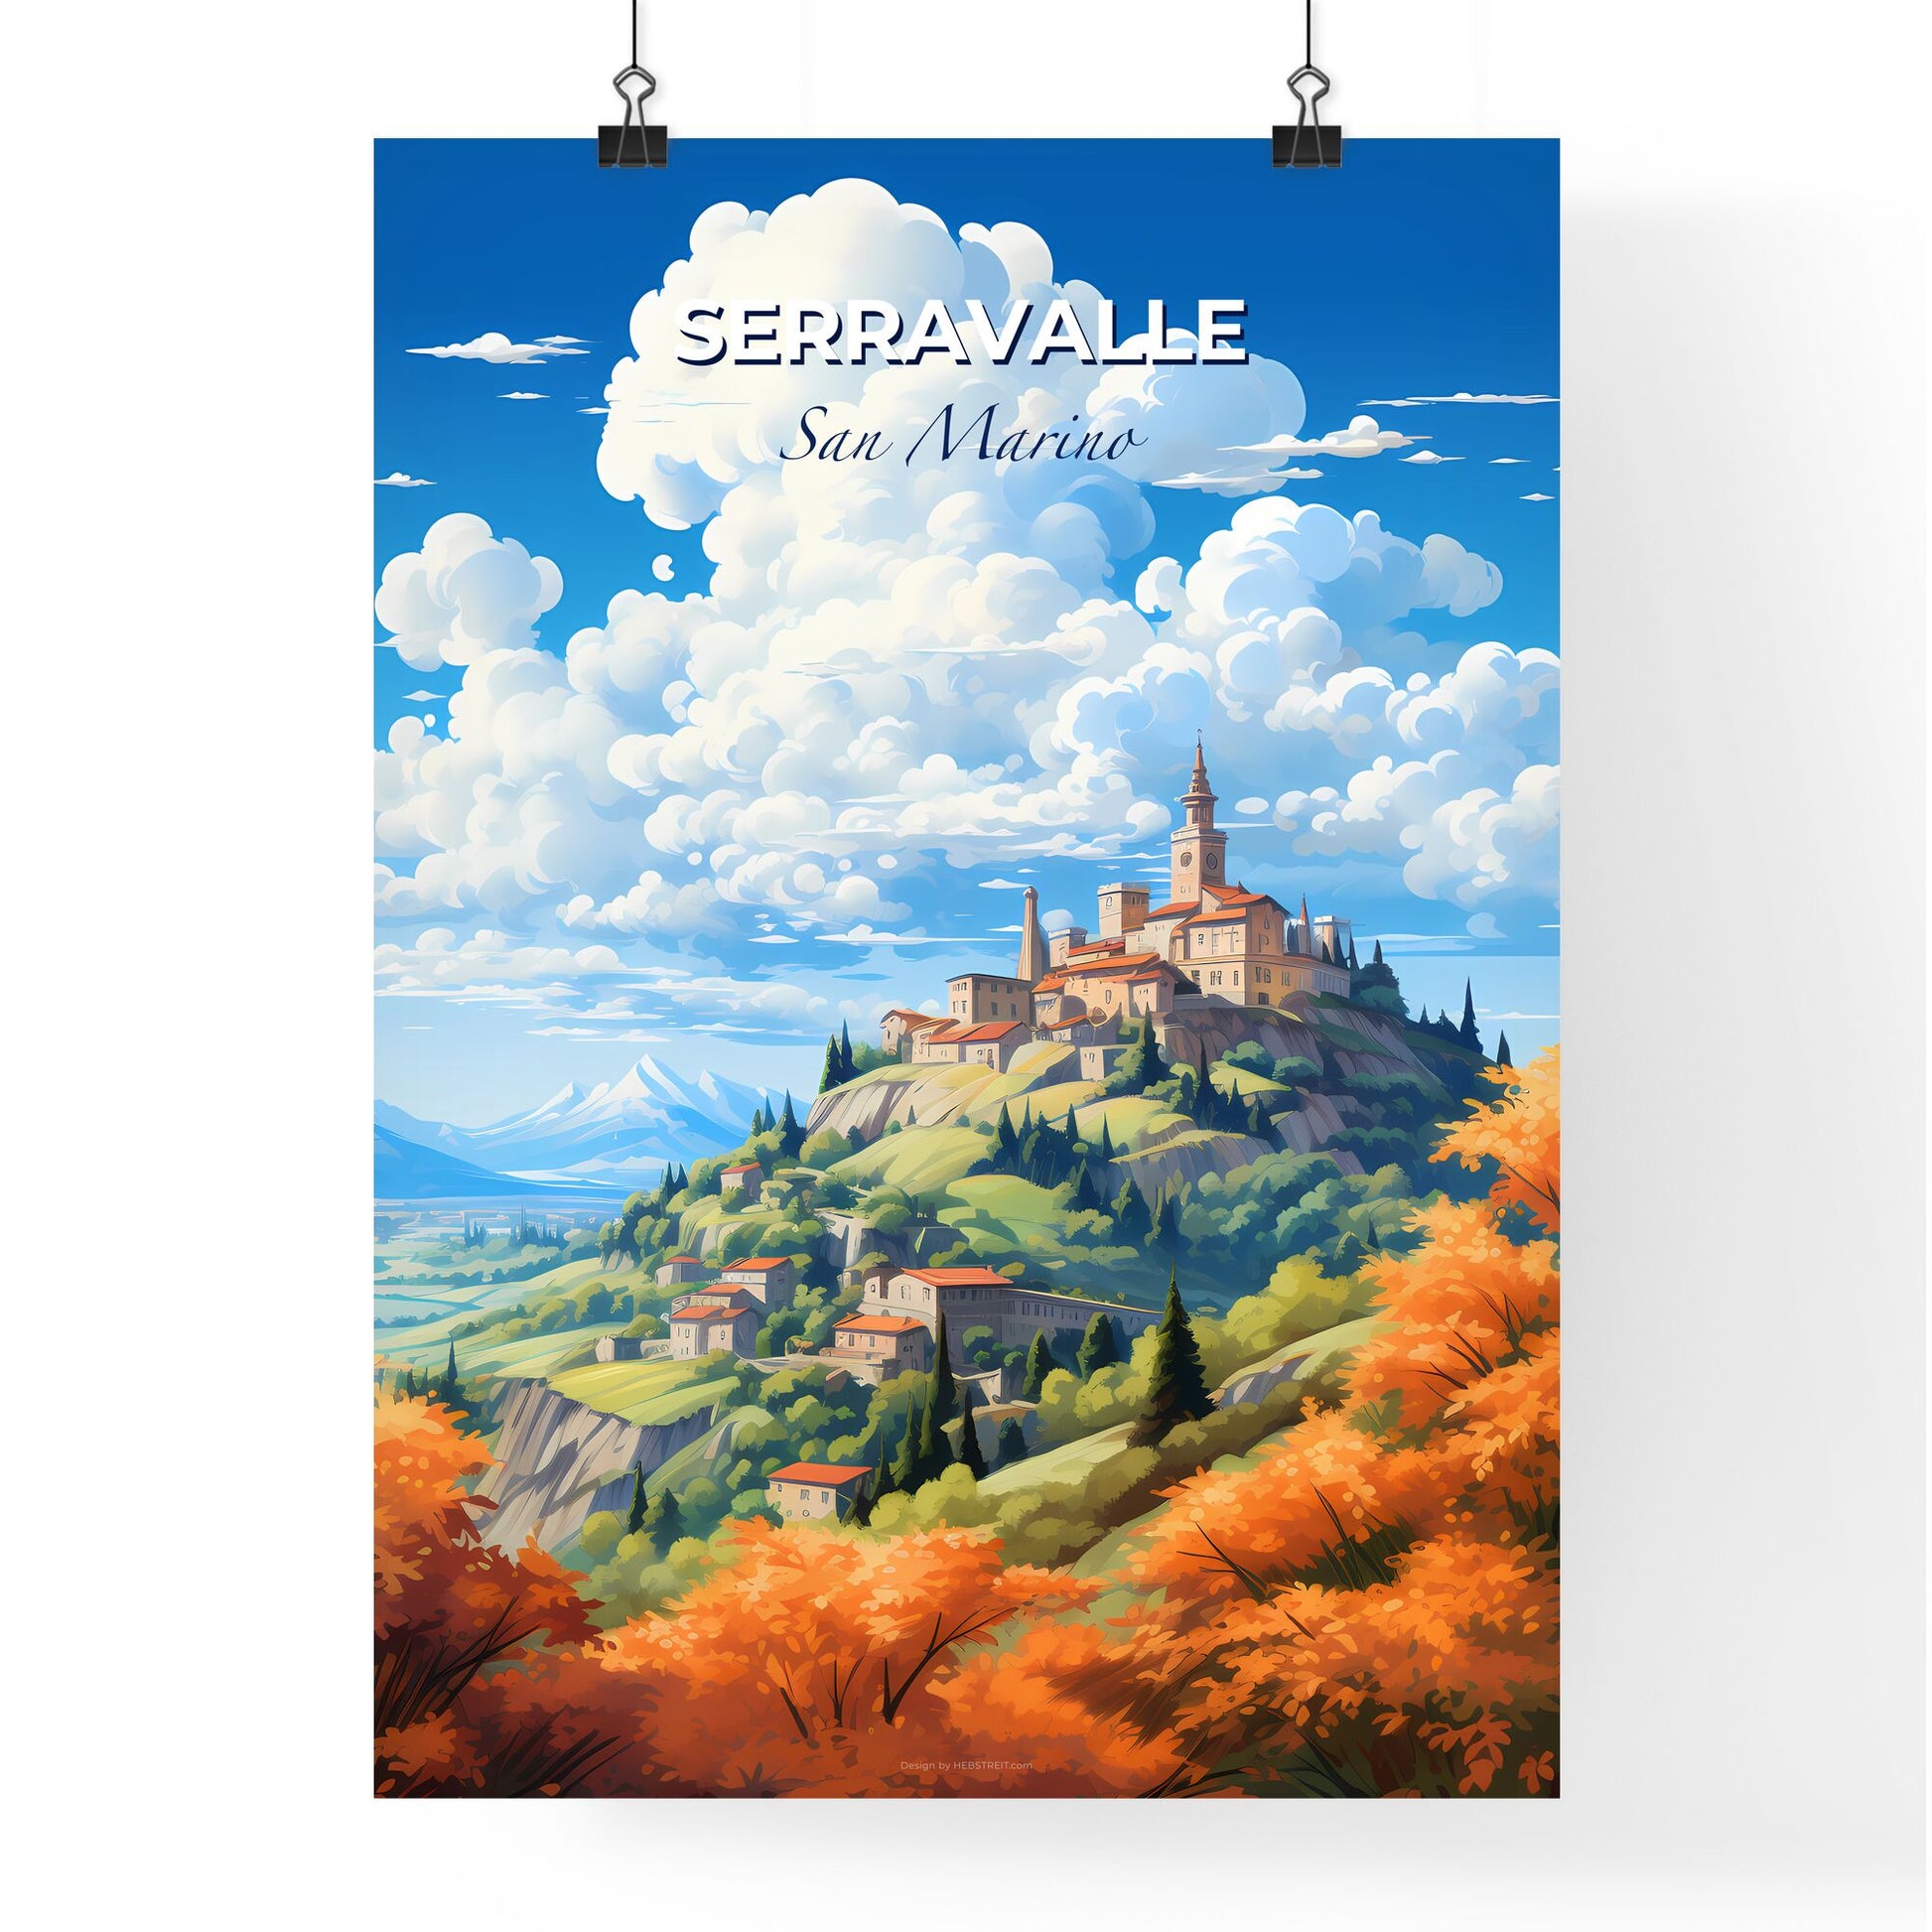 Serravalle San Marino Skyline - A Landscape Of A Village On A Hill With Trees And Clouds - Customizable Travel Gift Default Title